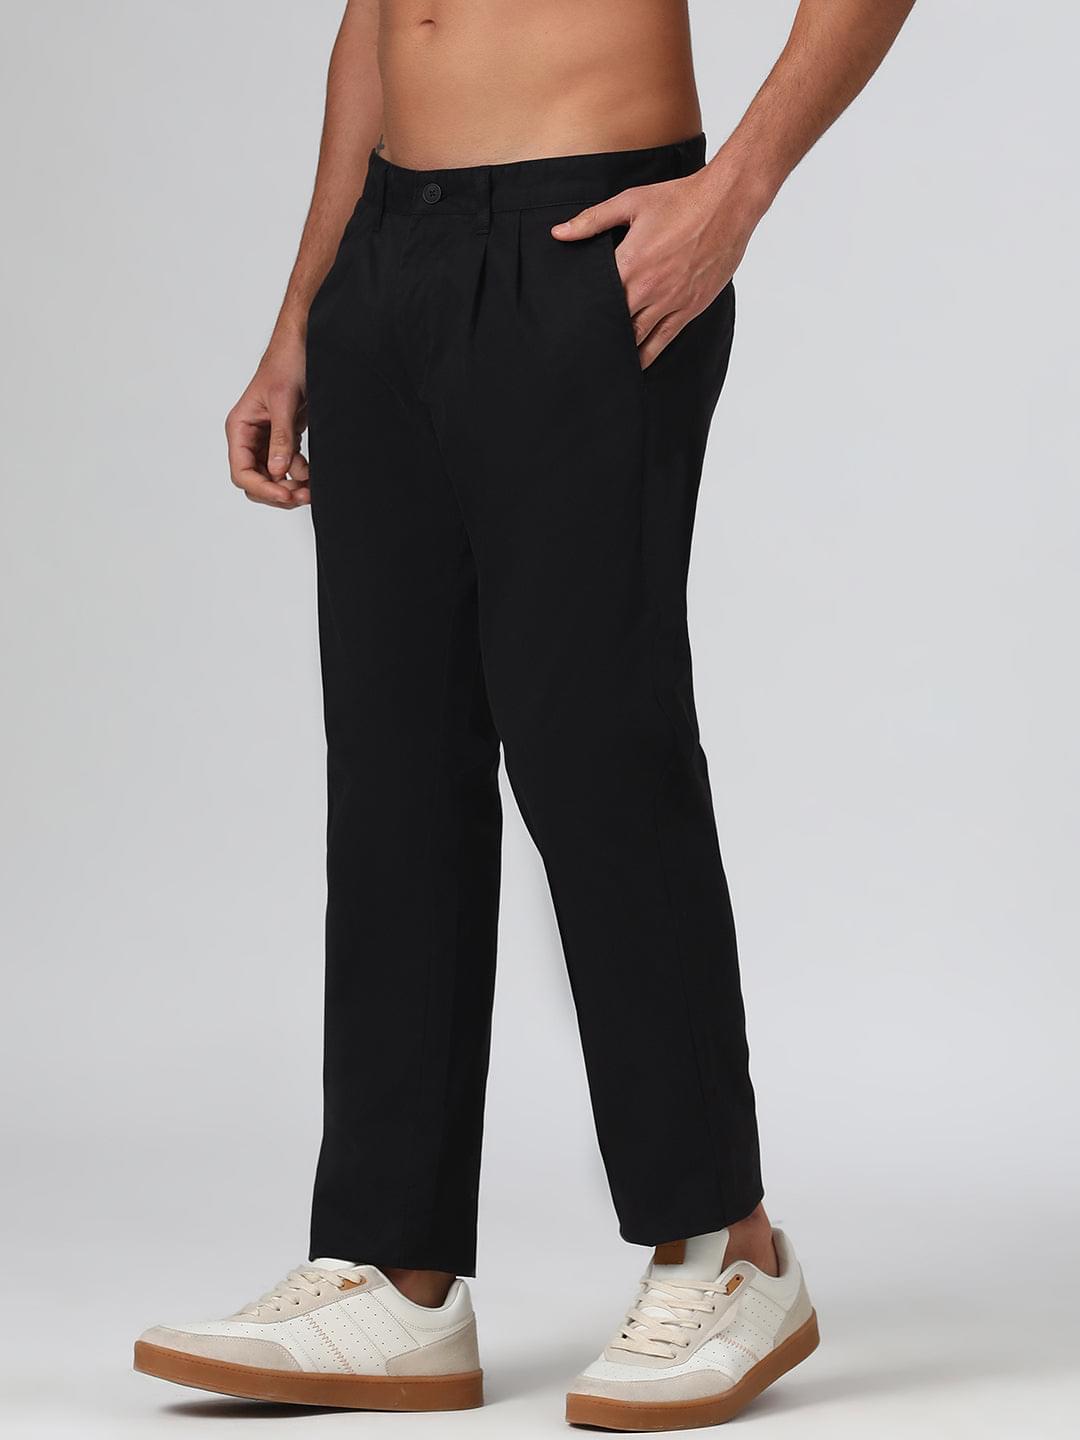 Organic Cotton Stretch Chino in Black- Comfort Fit